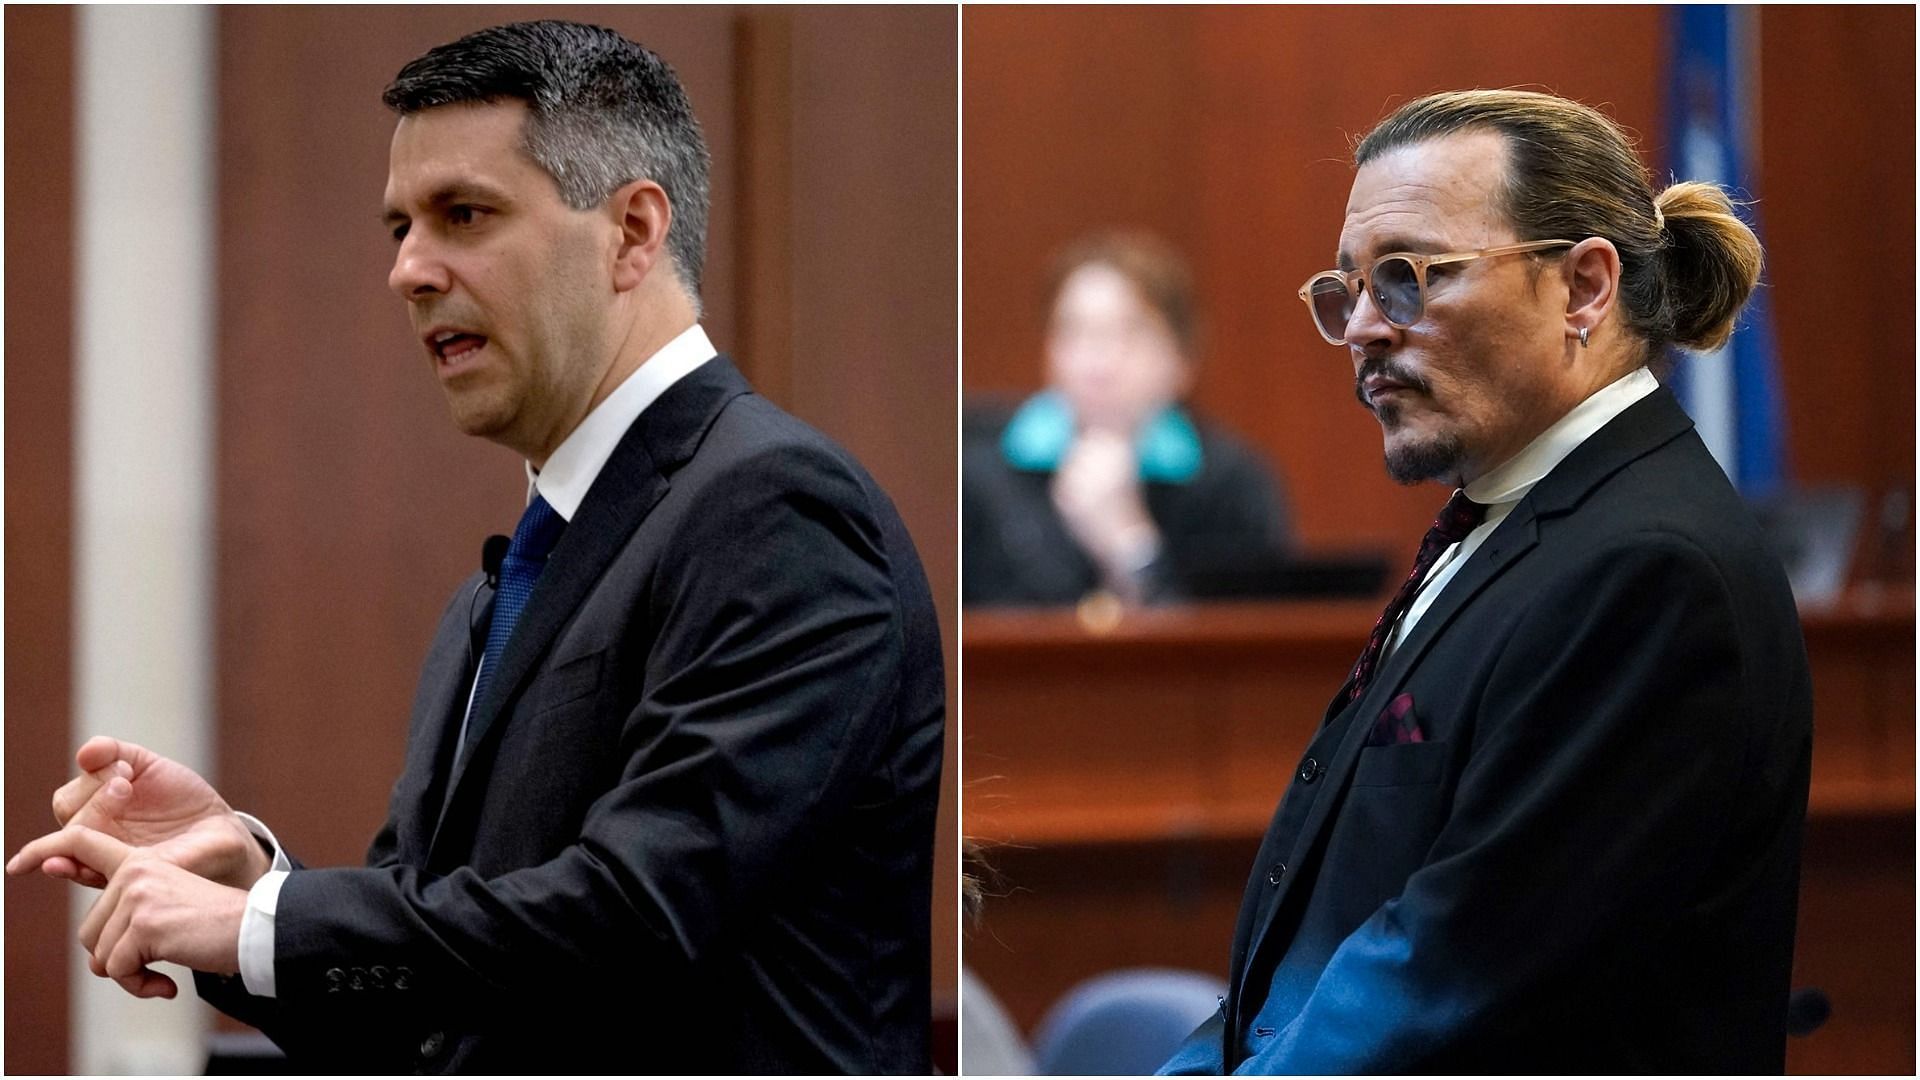 Amber Heard&#039;s lawyer Benjamin Rottenborn during his closing arguments against Johnny Depp (Image via Brendan Smialowski and Kevin Lamarque/POOL/AFP/Getty Images)